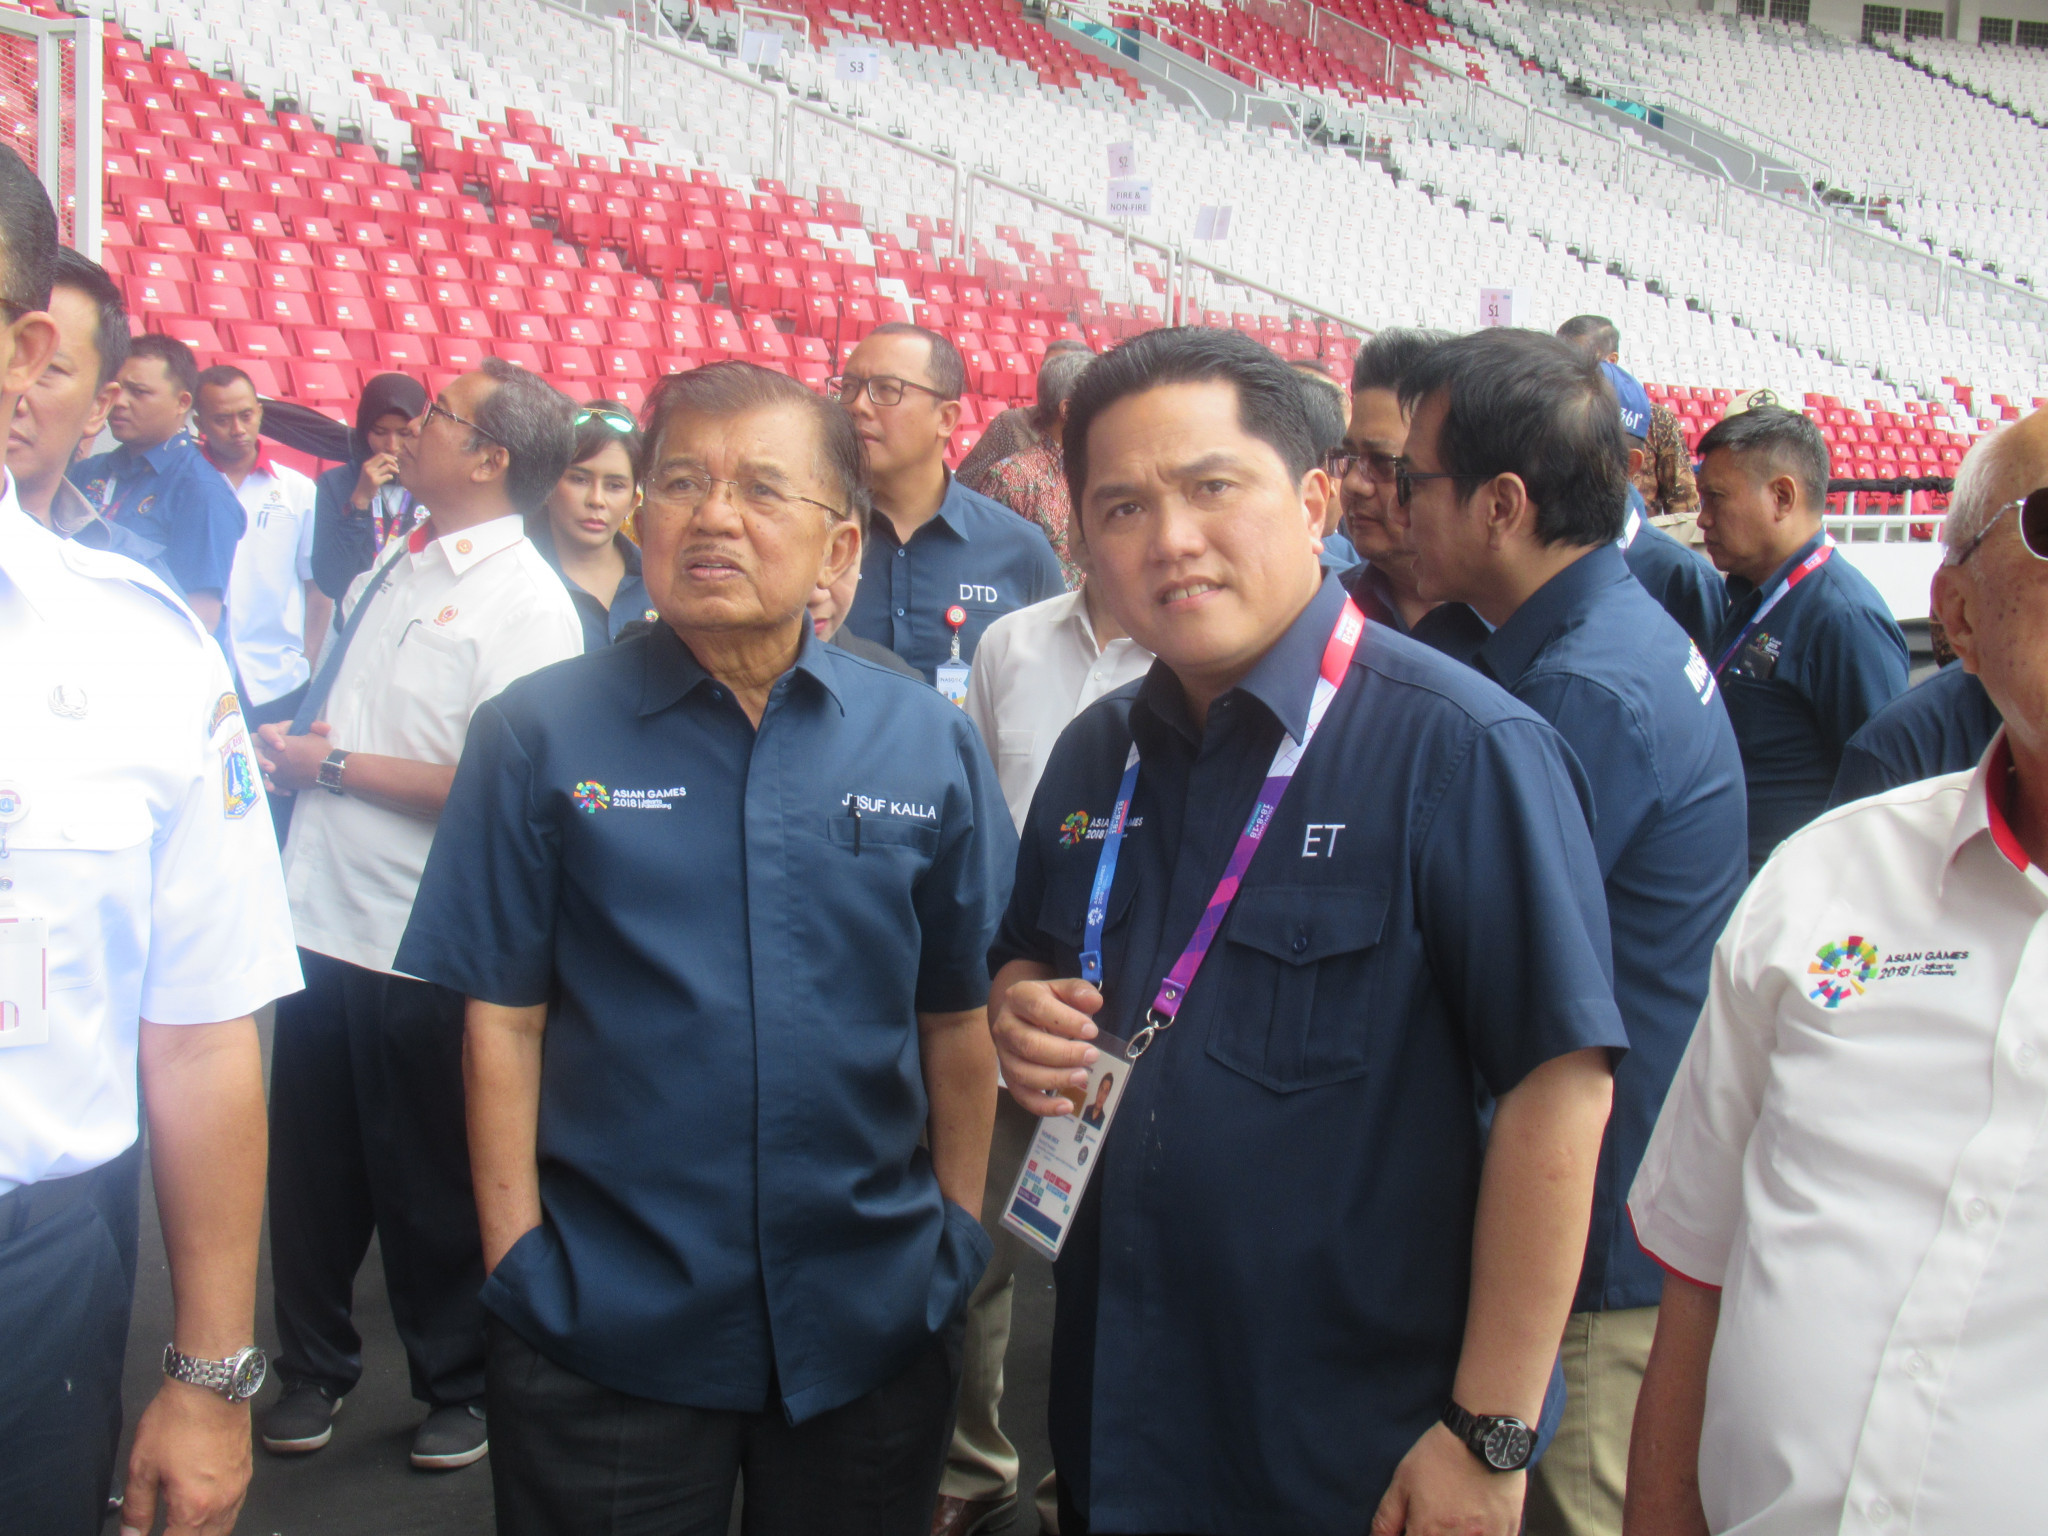 Indonesian Vice-President declares they are ready to host 2018 Asian Games as massive security operation prepared